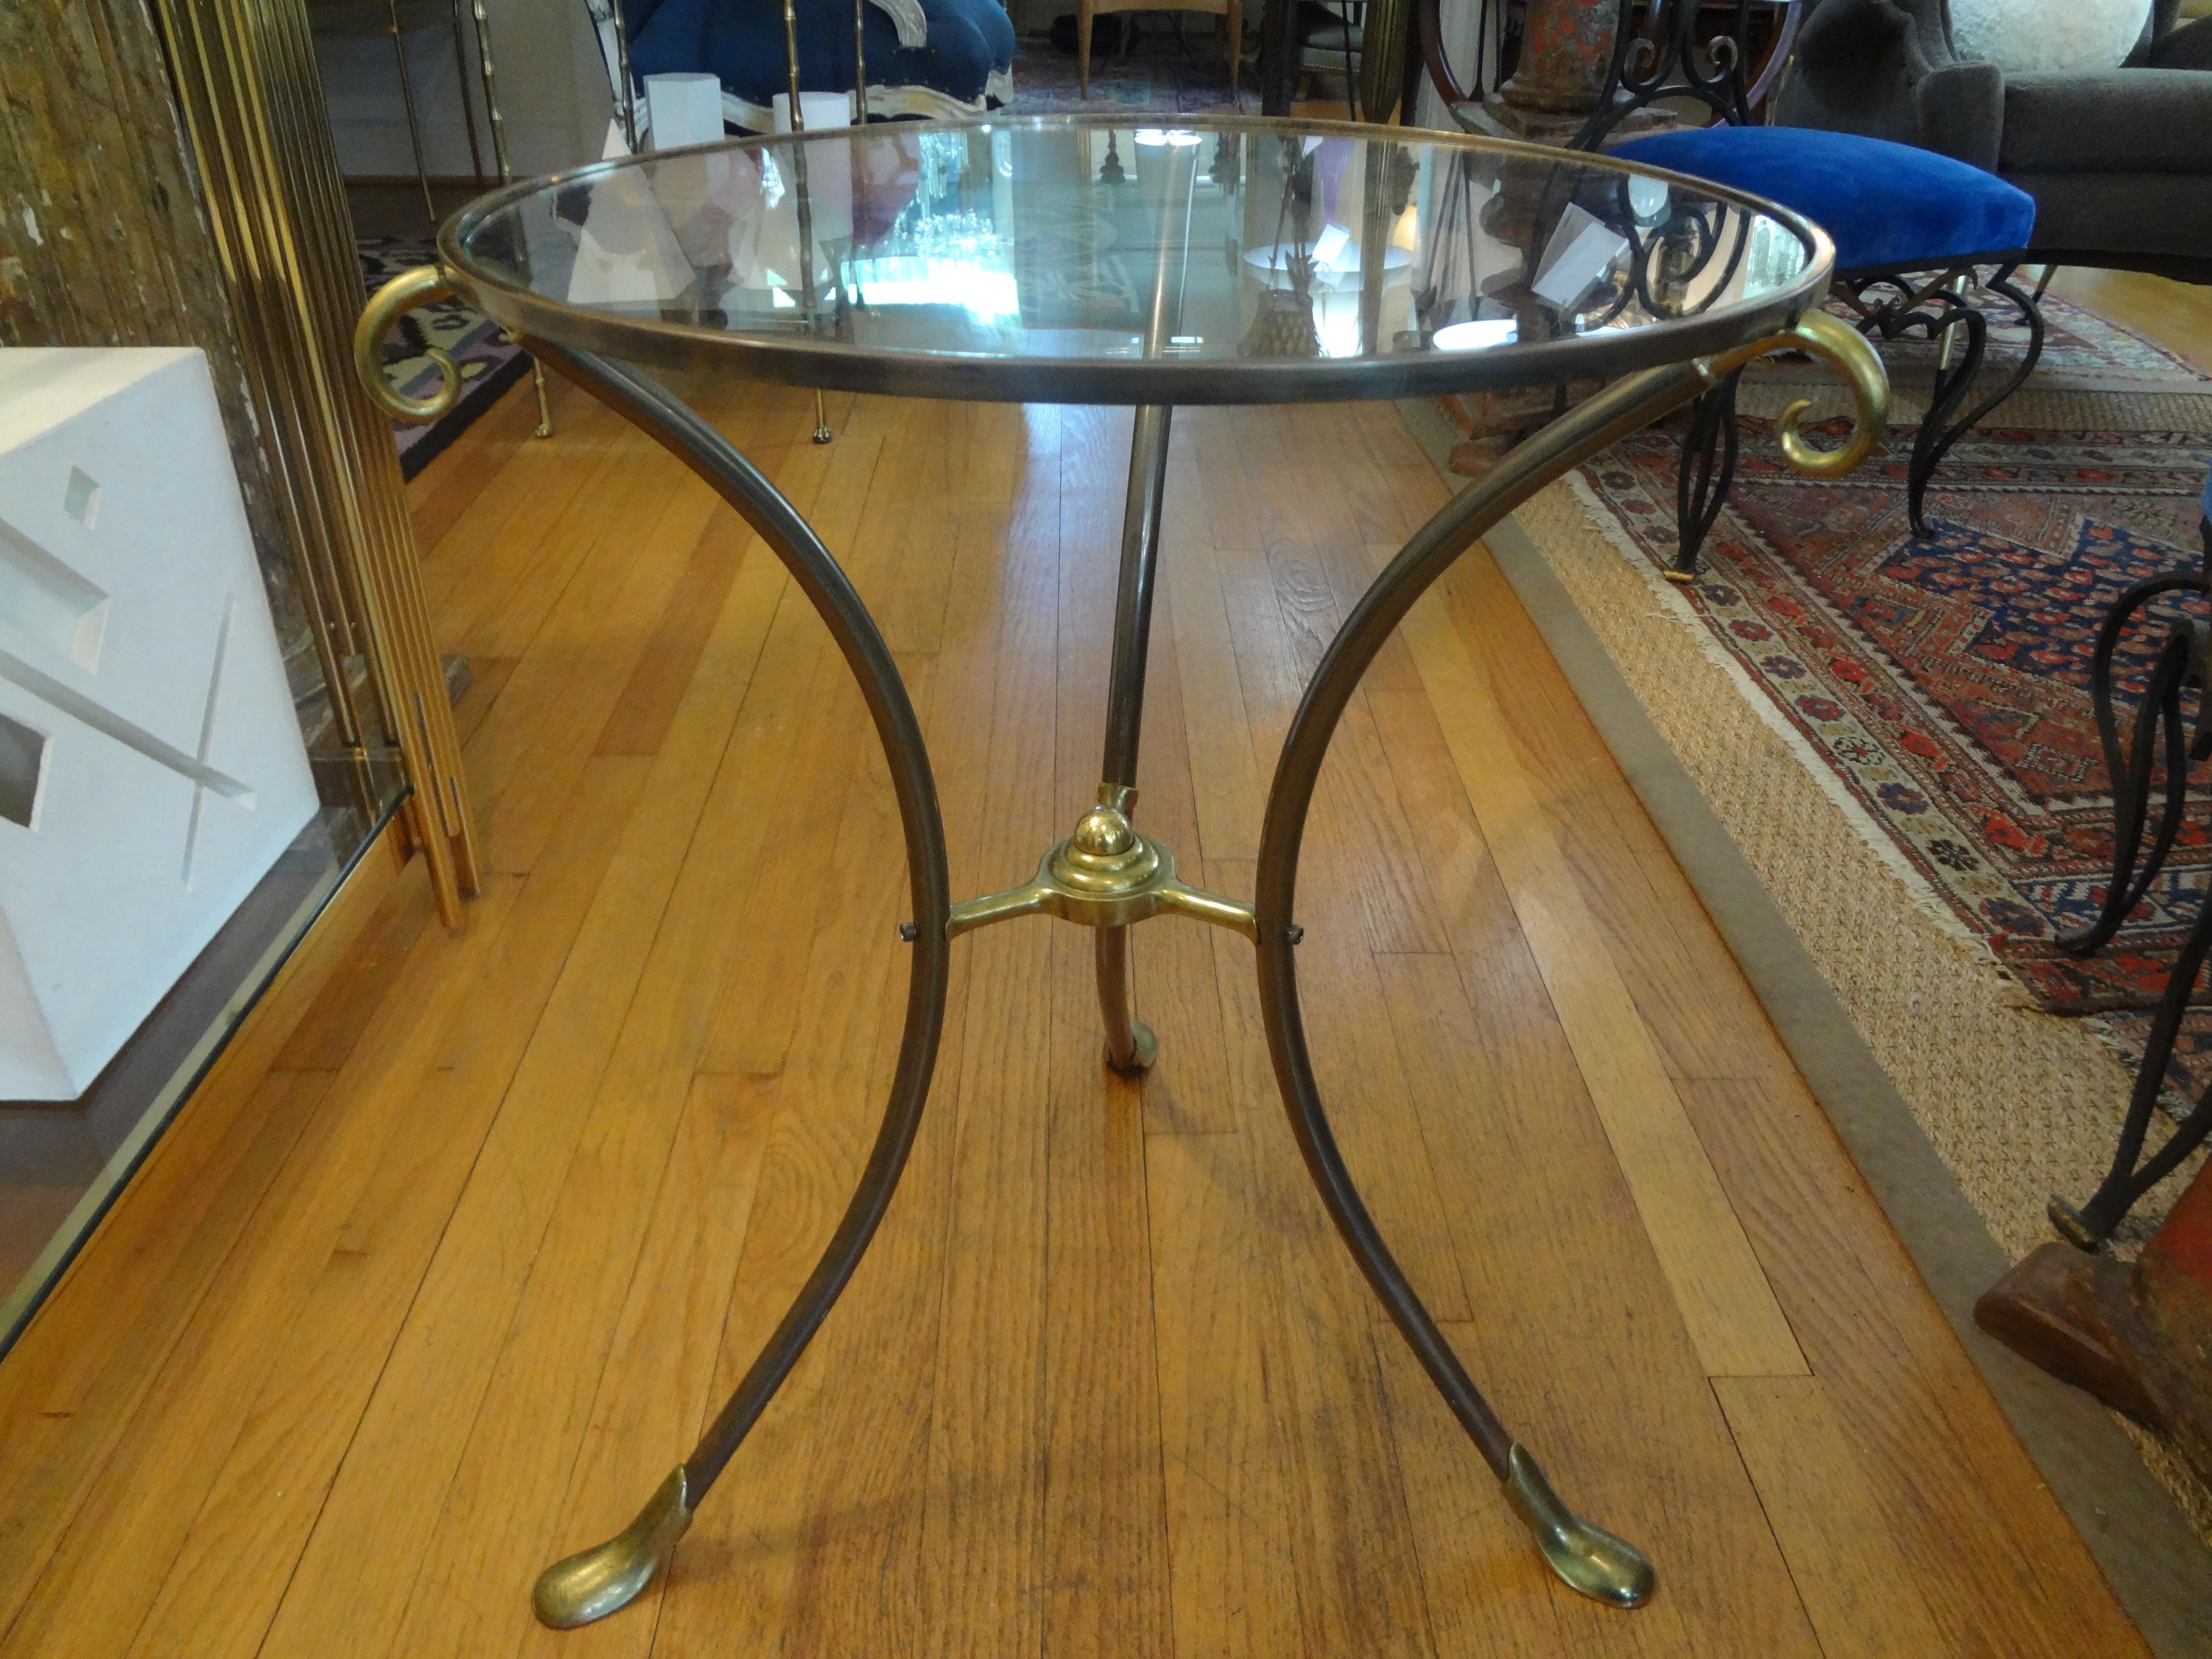 Stunning vintage French Maison Baguès style bronze and brass table, side table, guéridon or drink table. This interesting French Neoclassical style or Directoire style table would work well in a variety of rooms. Our offered table dates to the 1940s